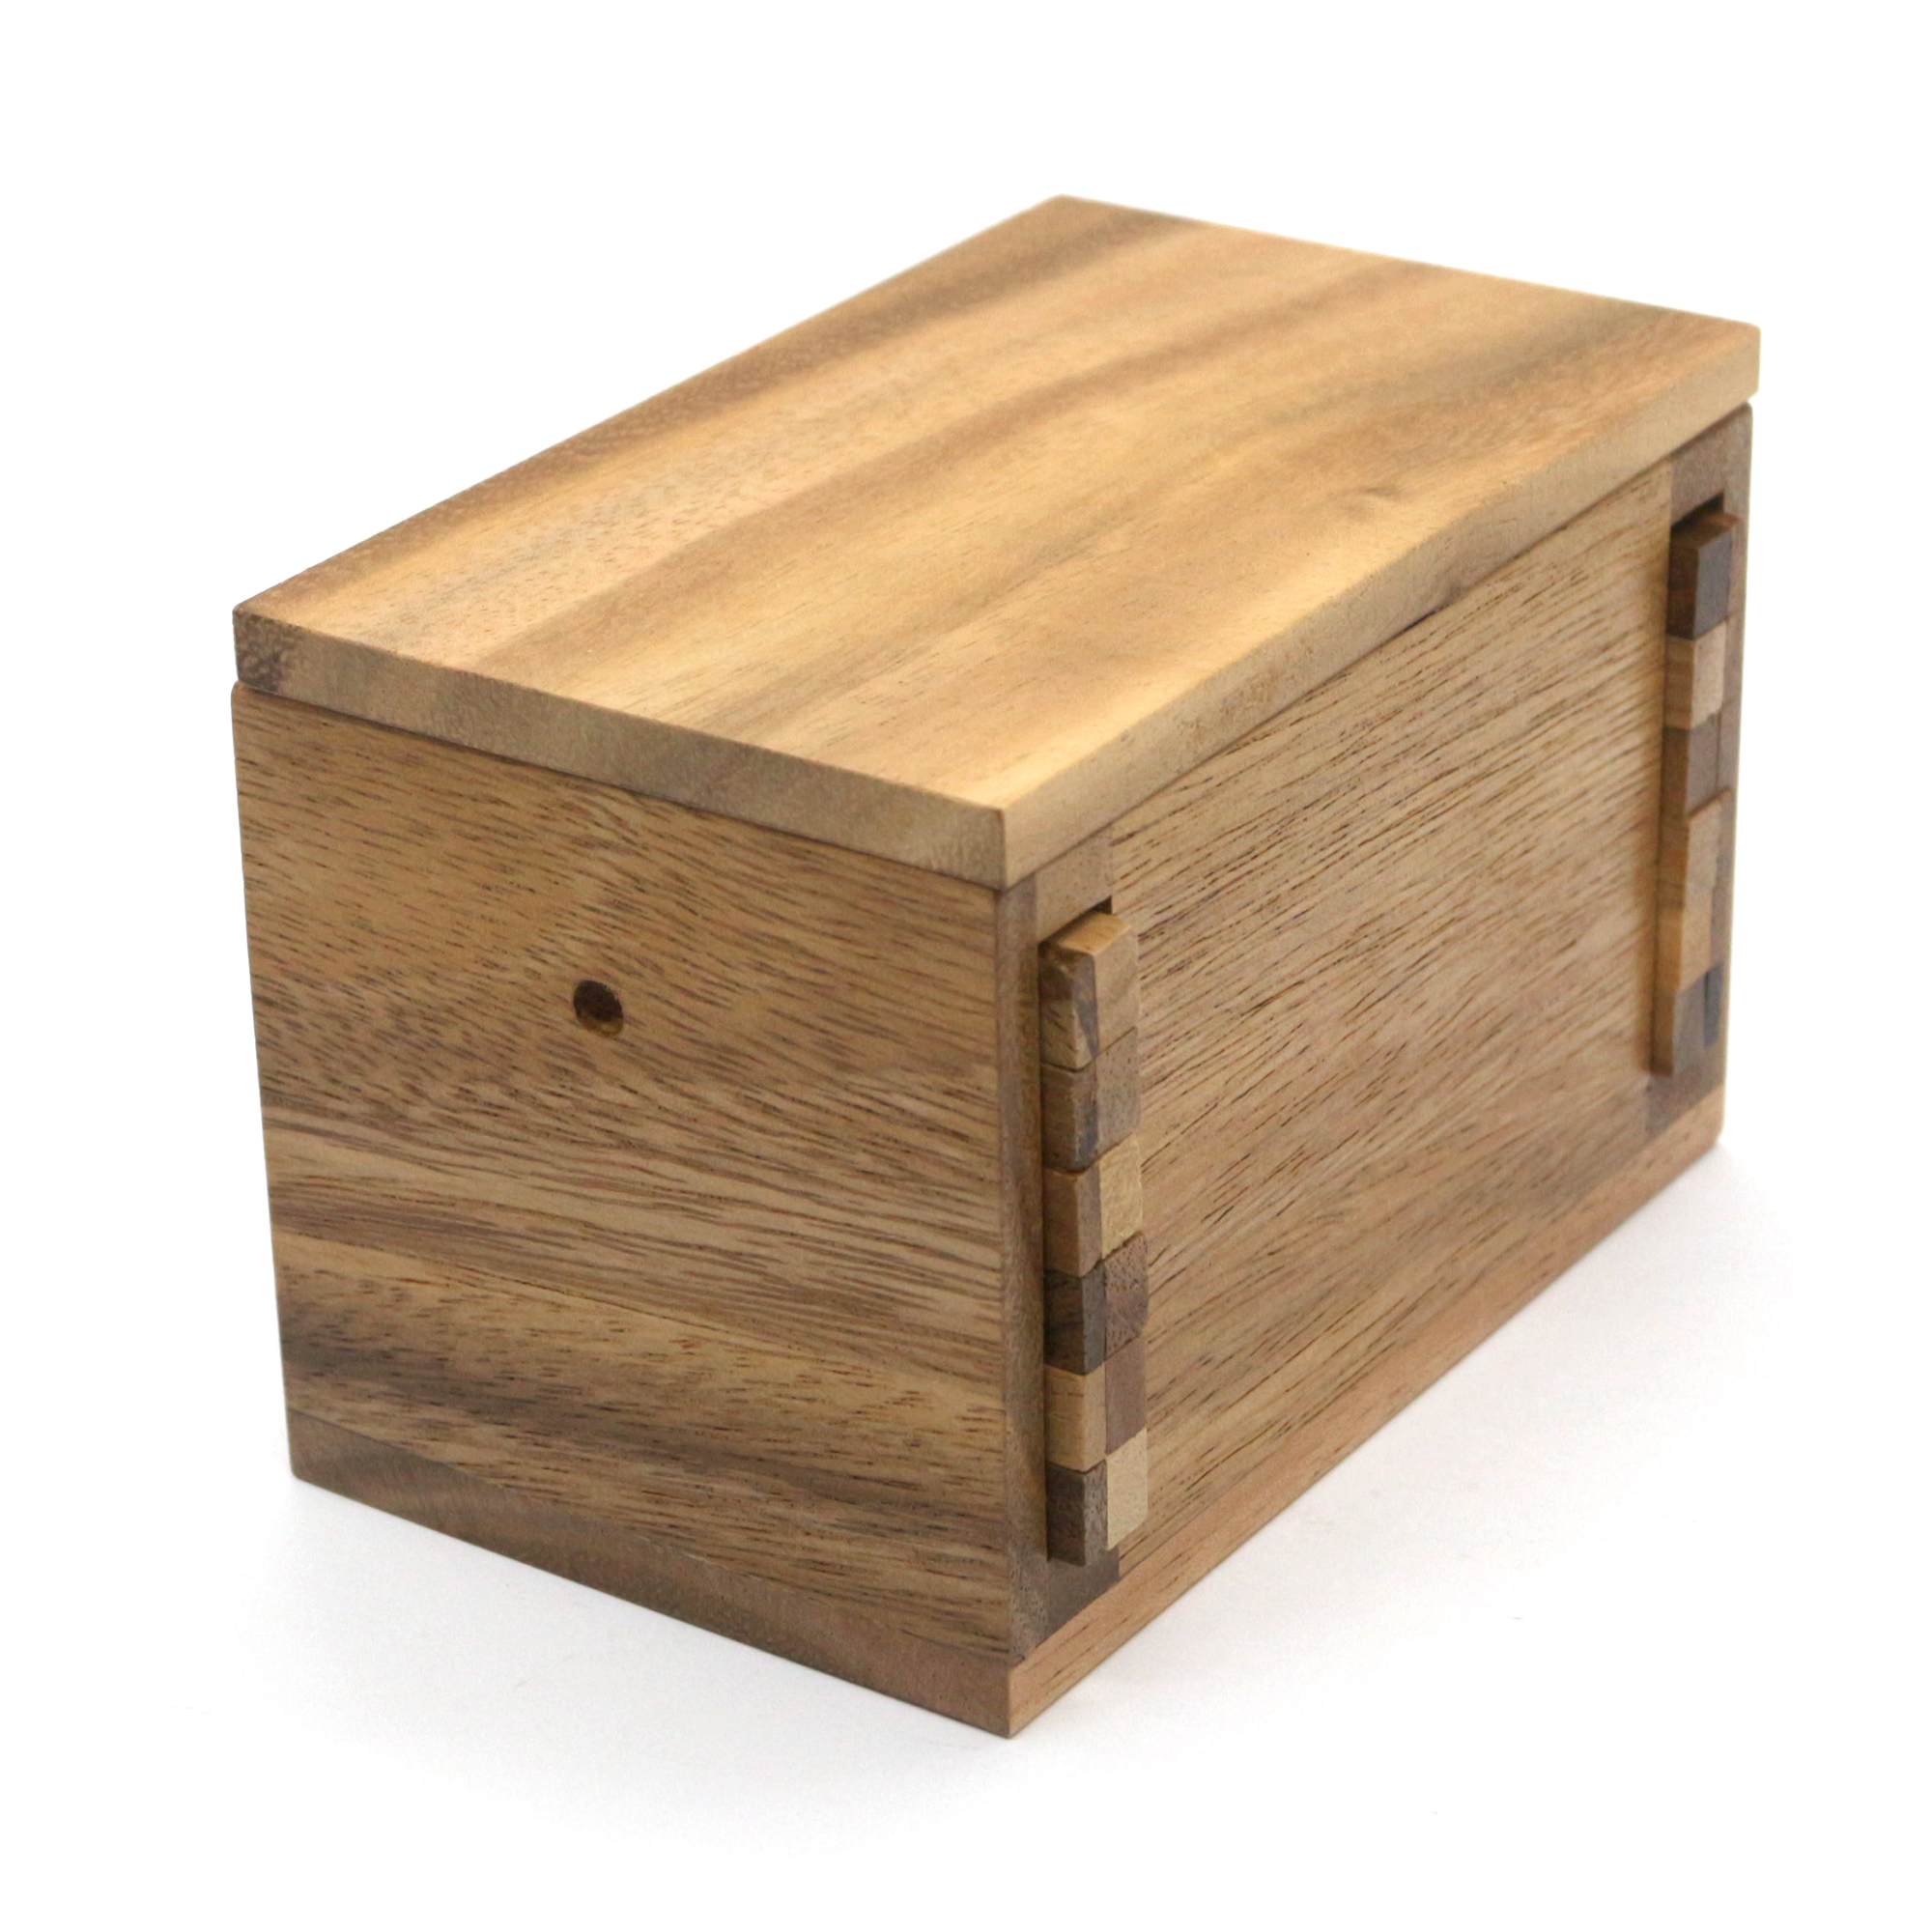 Puzzle Gift Case Box with Secret Compartments Wood Money Box to Challenge Fun 